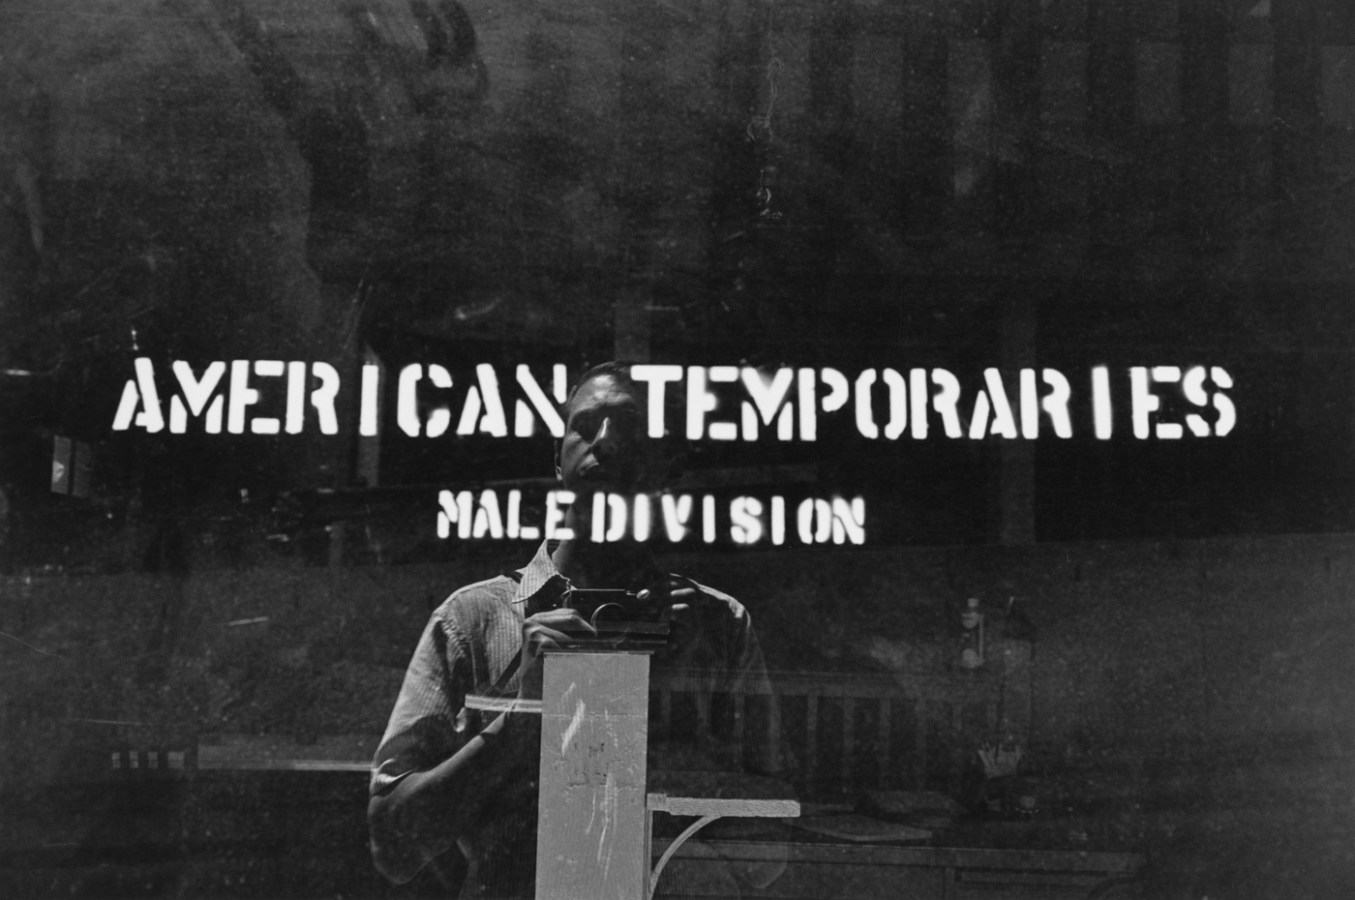 Black and white photograph of signage taken from the exterior with reflection